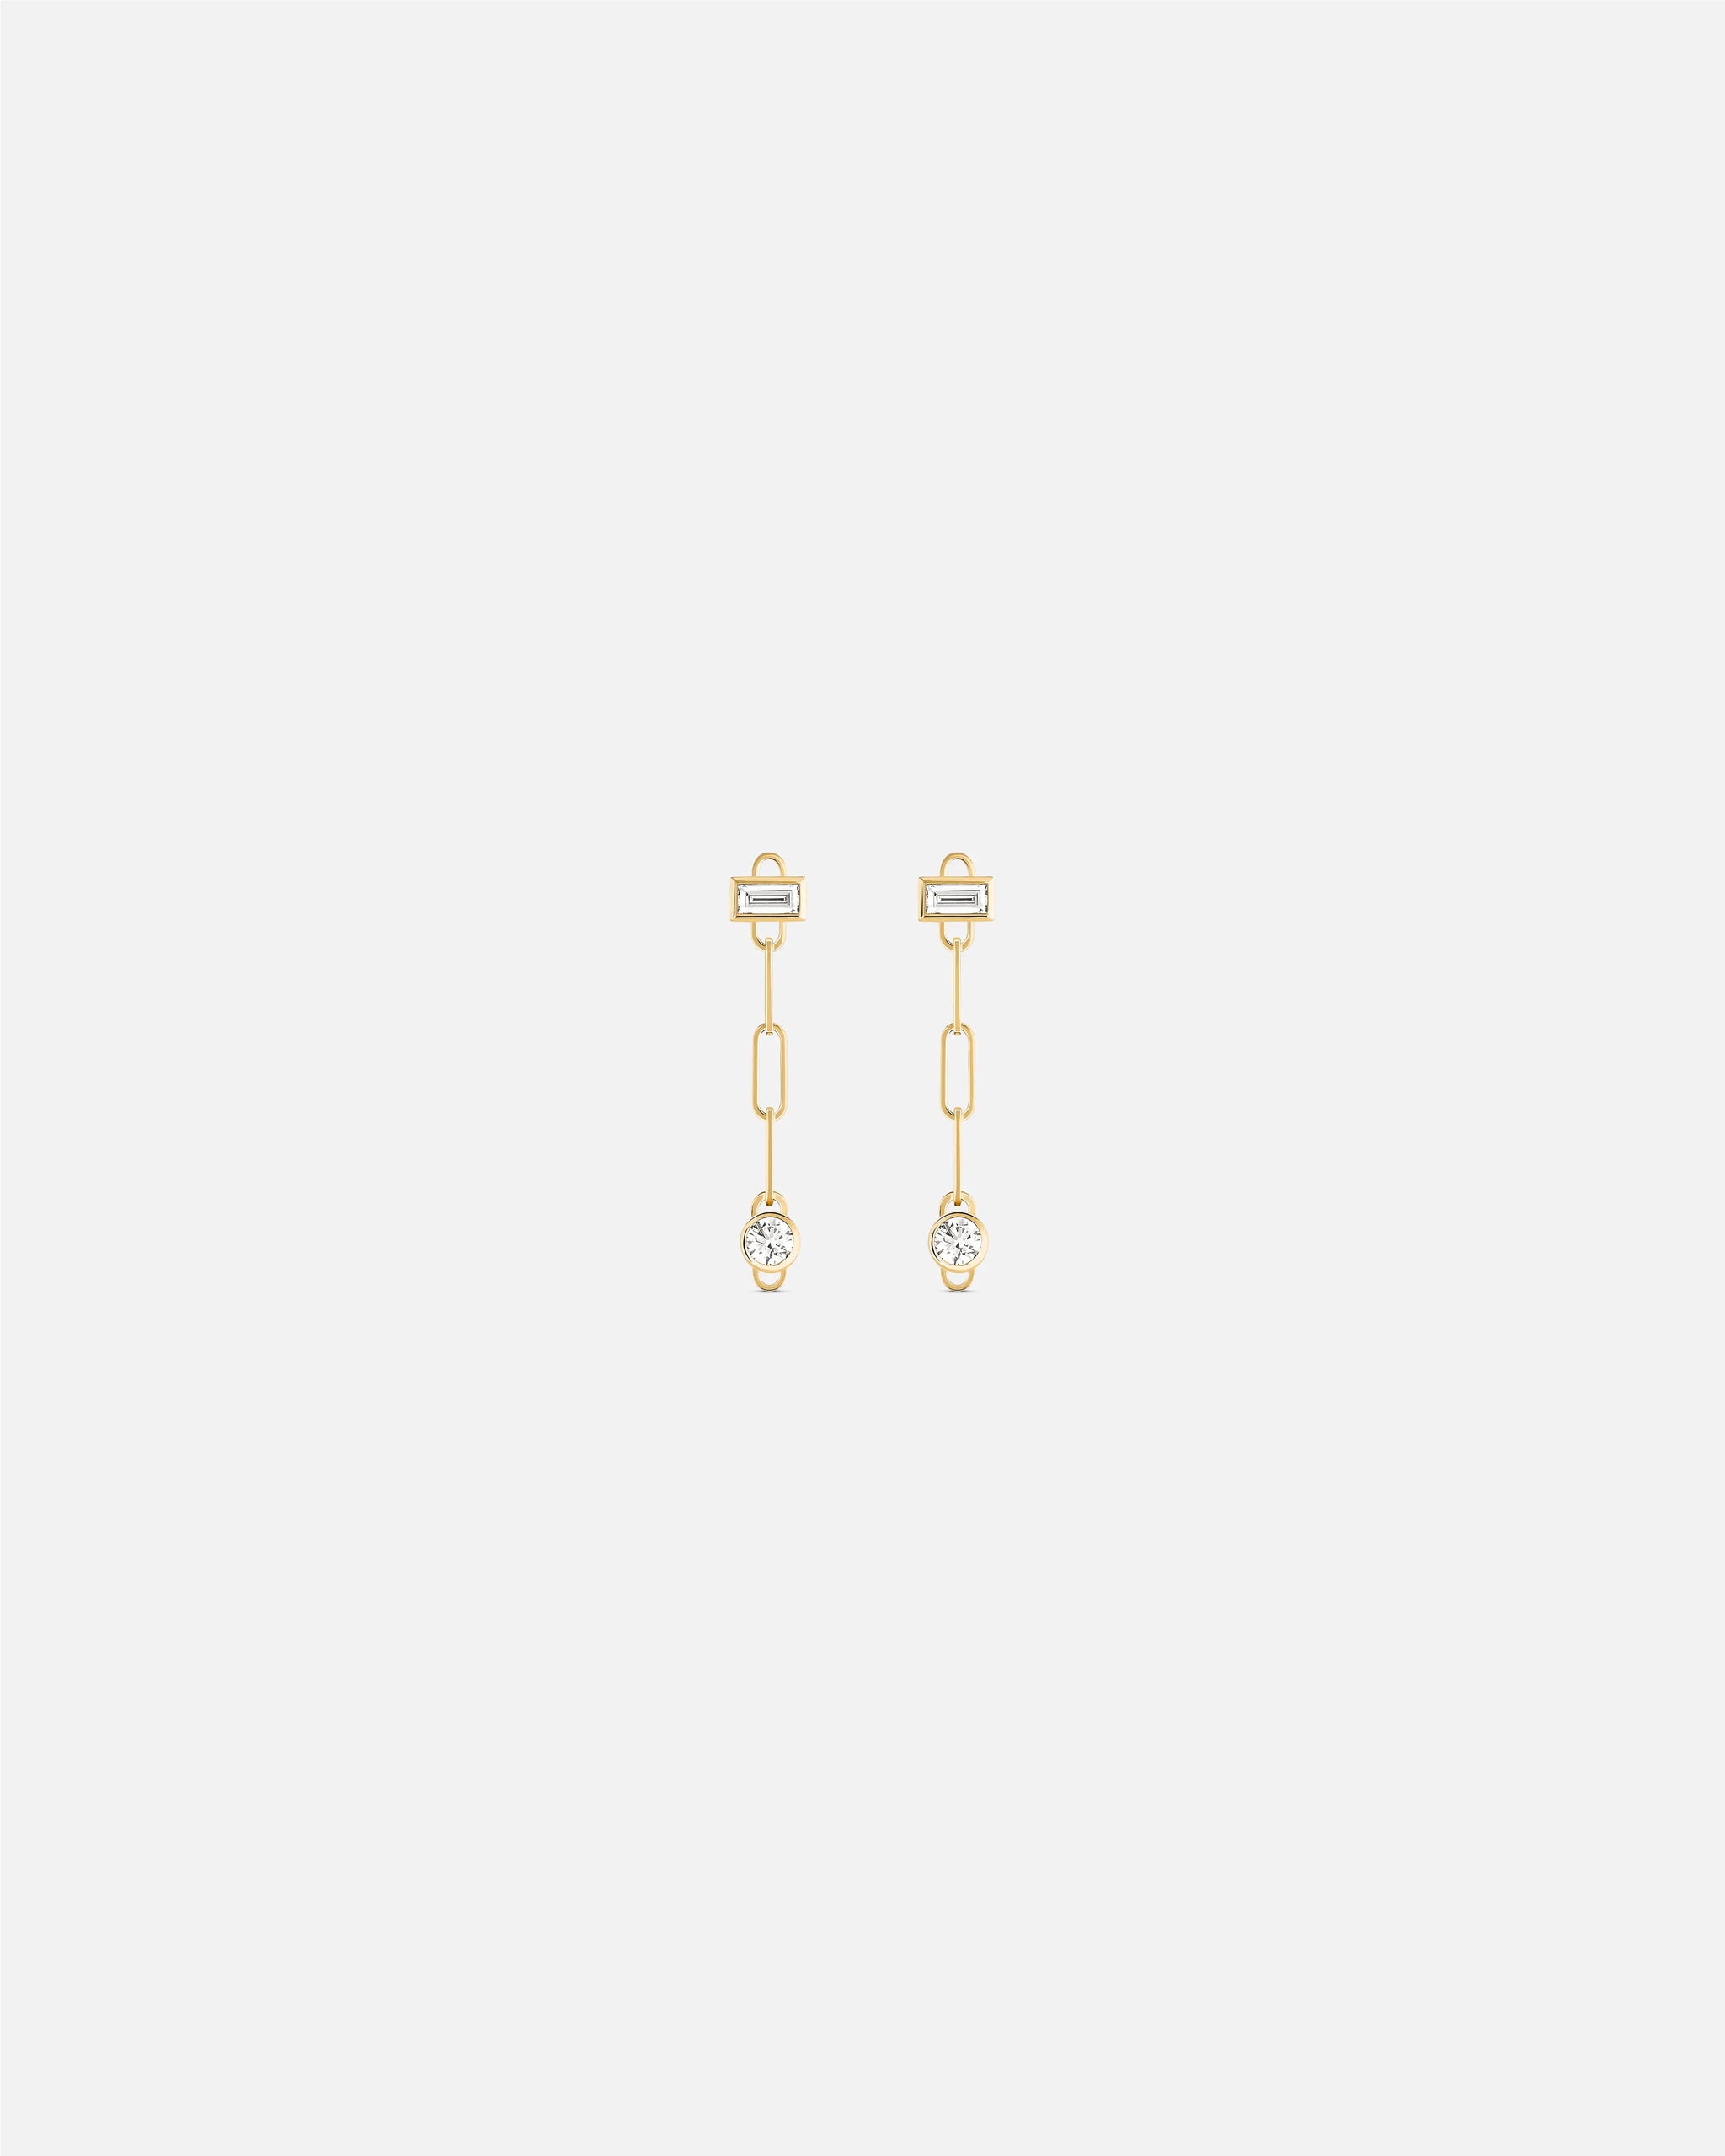 Baguette Round PM Classics Earrings in Yellow Gold - 1 - Nouvel Heritage